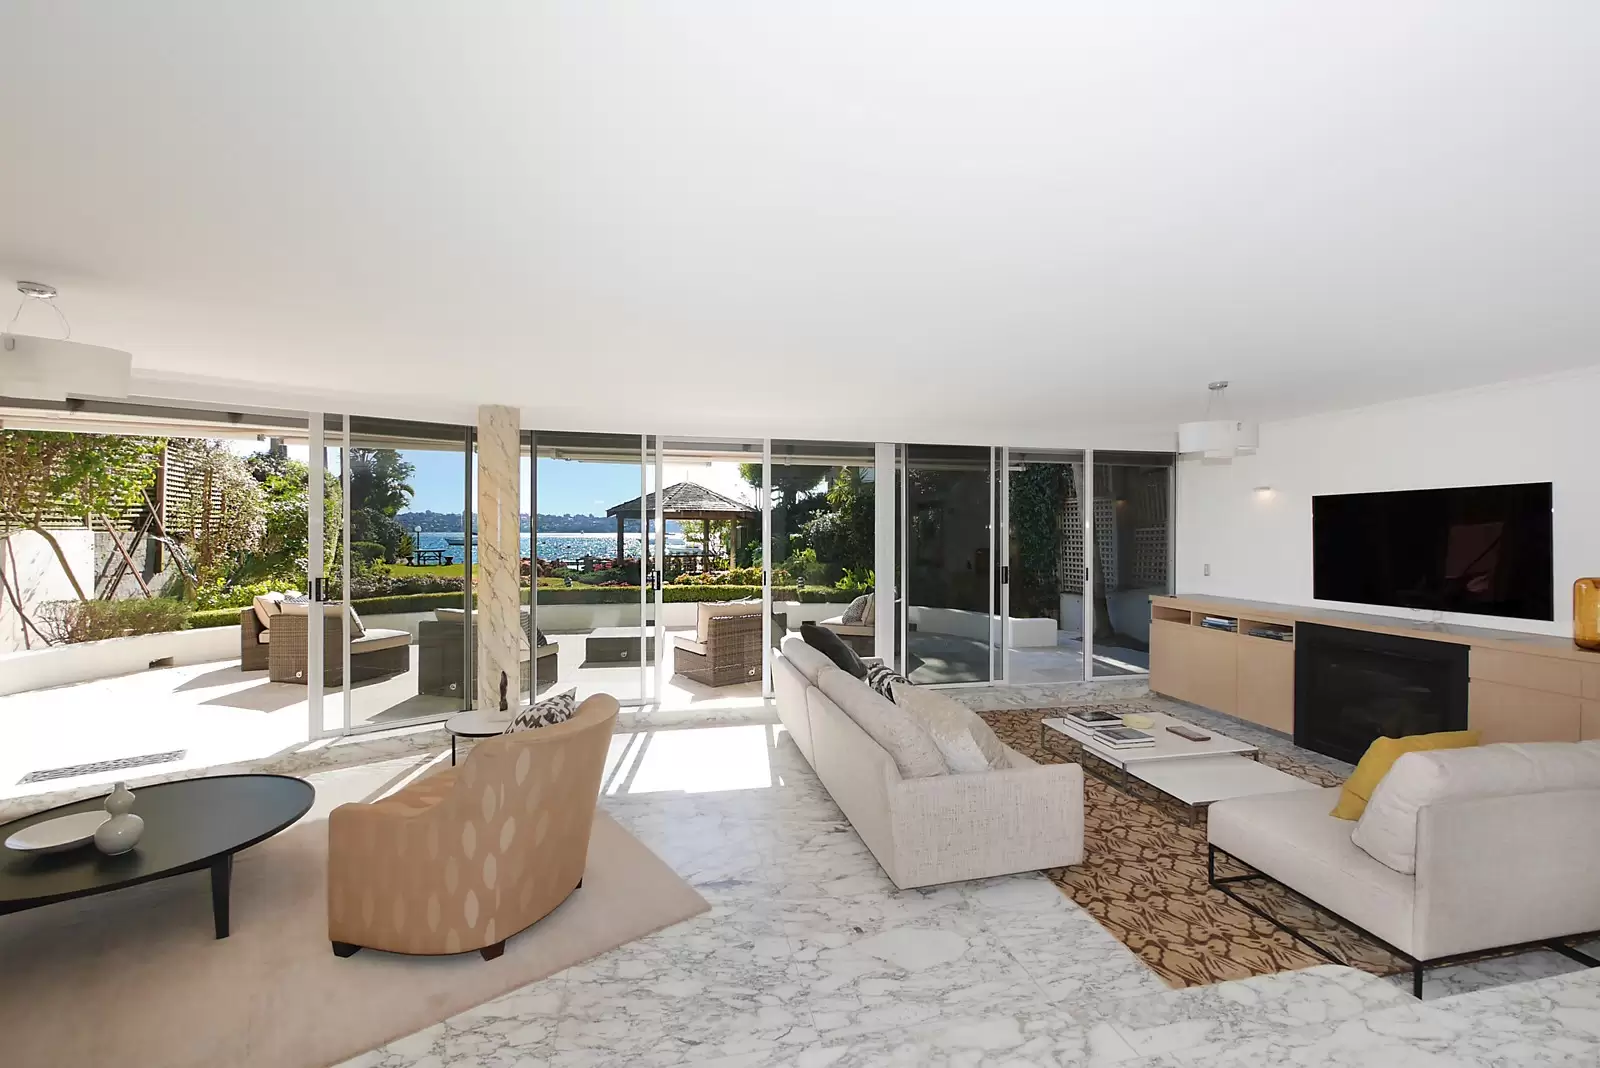 Photo #7: 1/77-81 Yarranabbe Road, Darling Point - Sold by Sydney Sotheby's International Realty